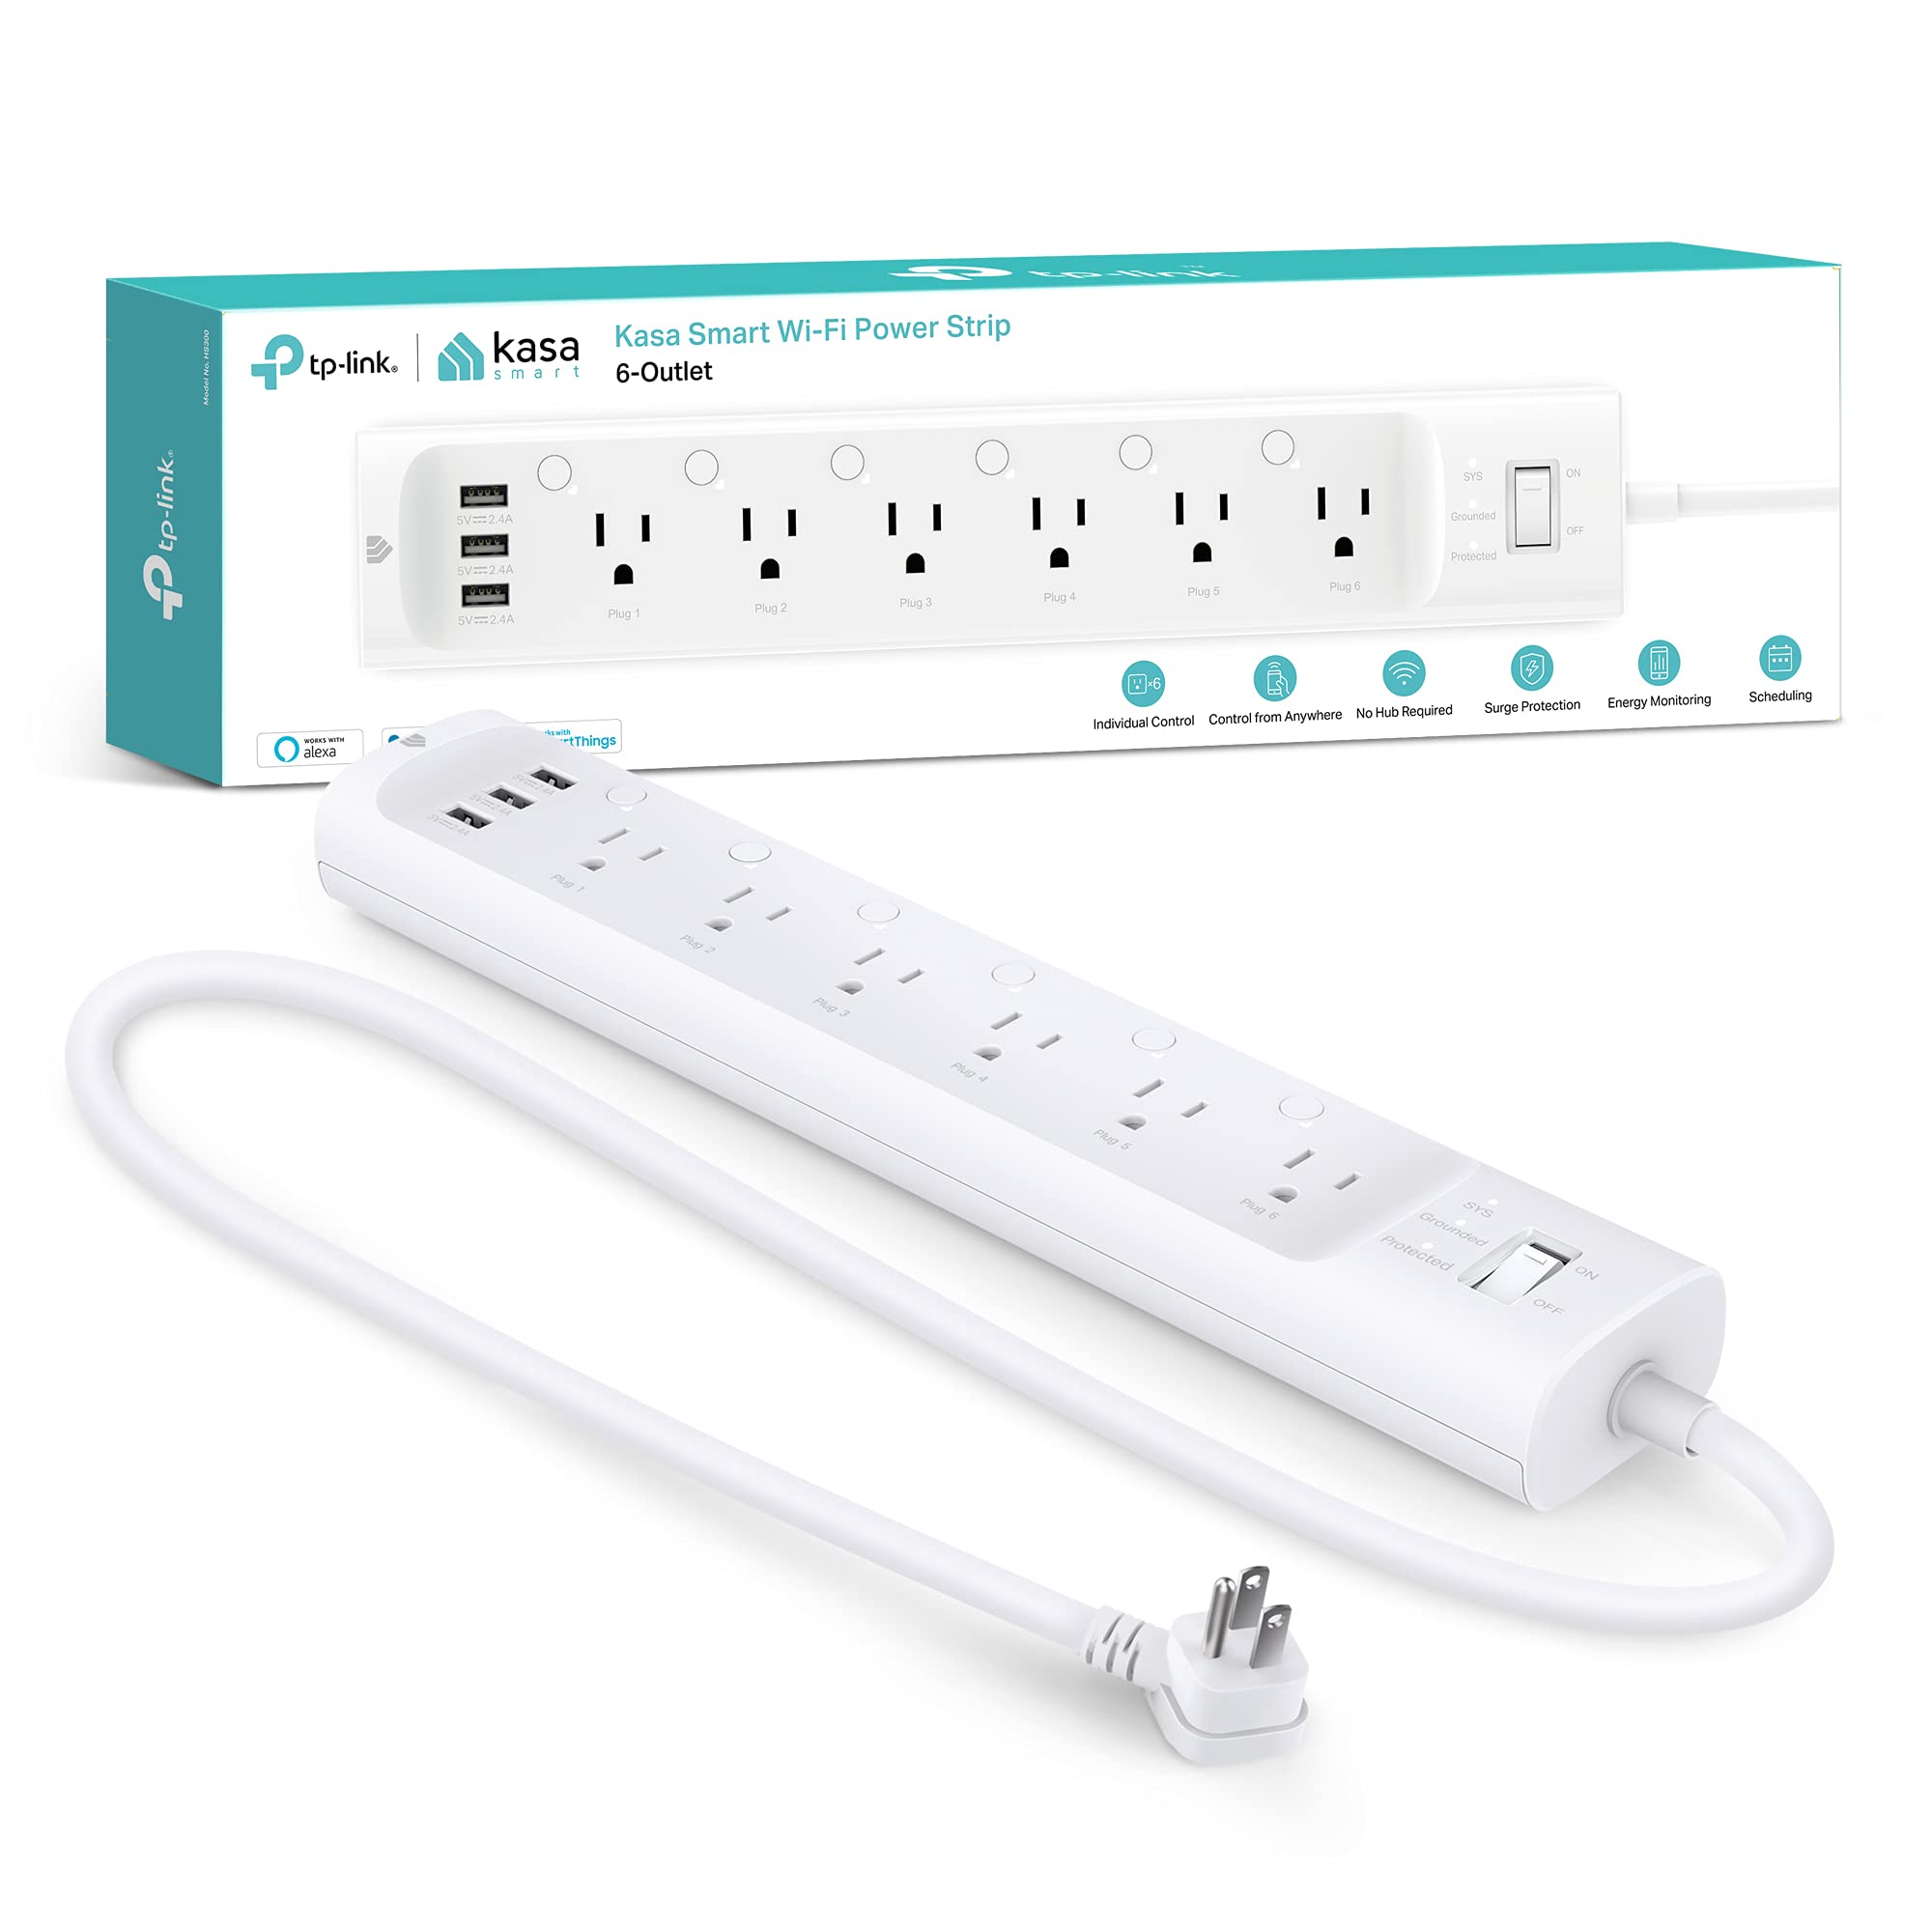 Kasa Smart Plug Power Strip (HS300), 6 x Smart Outlets and 3 x USB Ports, White $34.26 + Free Shipping w/ Prime or $35+